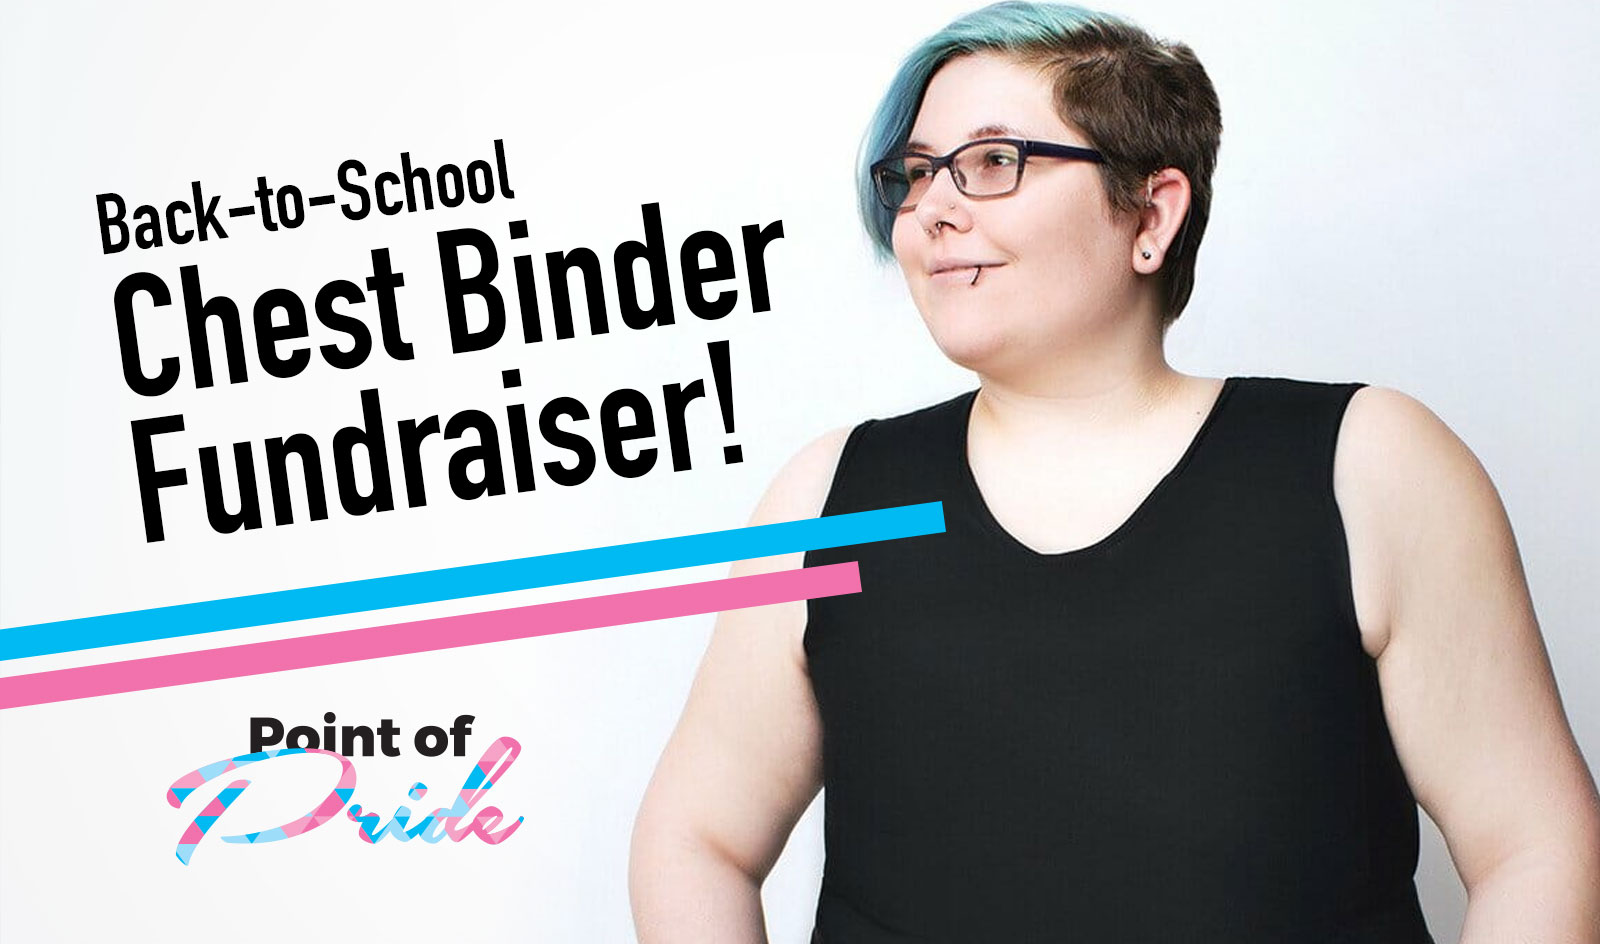 Support the Back-to-School Chest Binder Fundraiser!